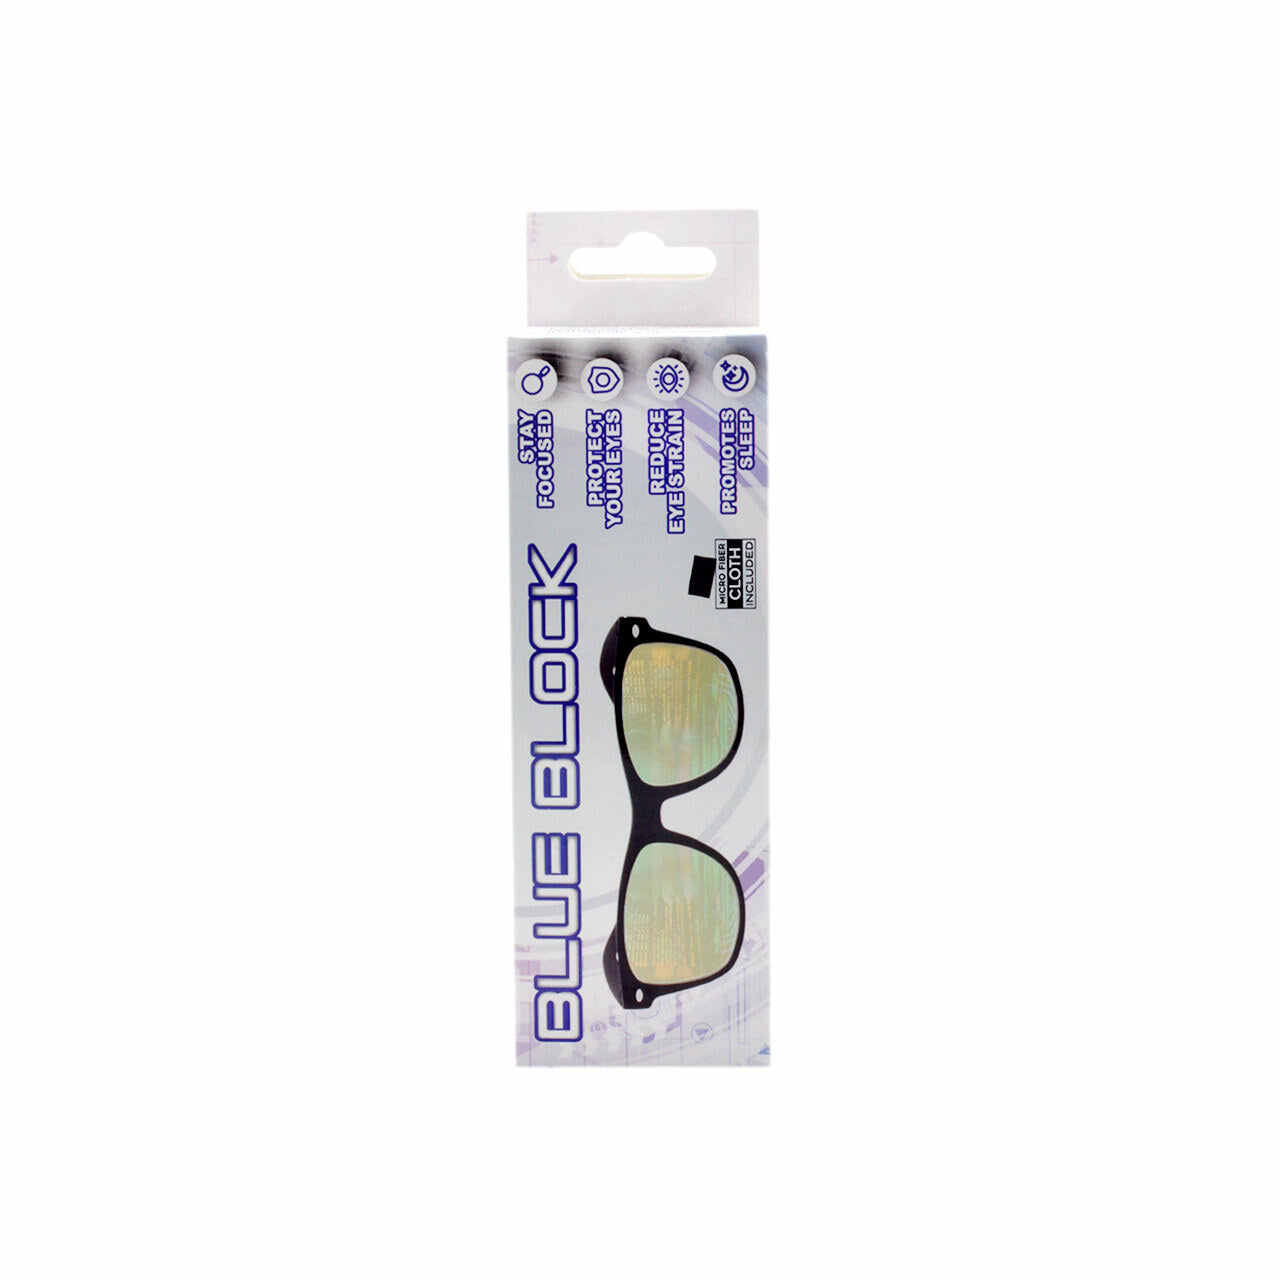 Acrylic Blue Light Block Glasses Cardboard Counter Display 18 Pieces  (Pack of Dozen)